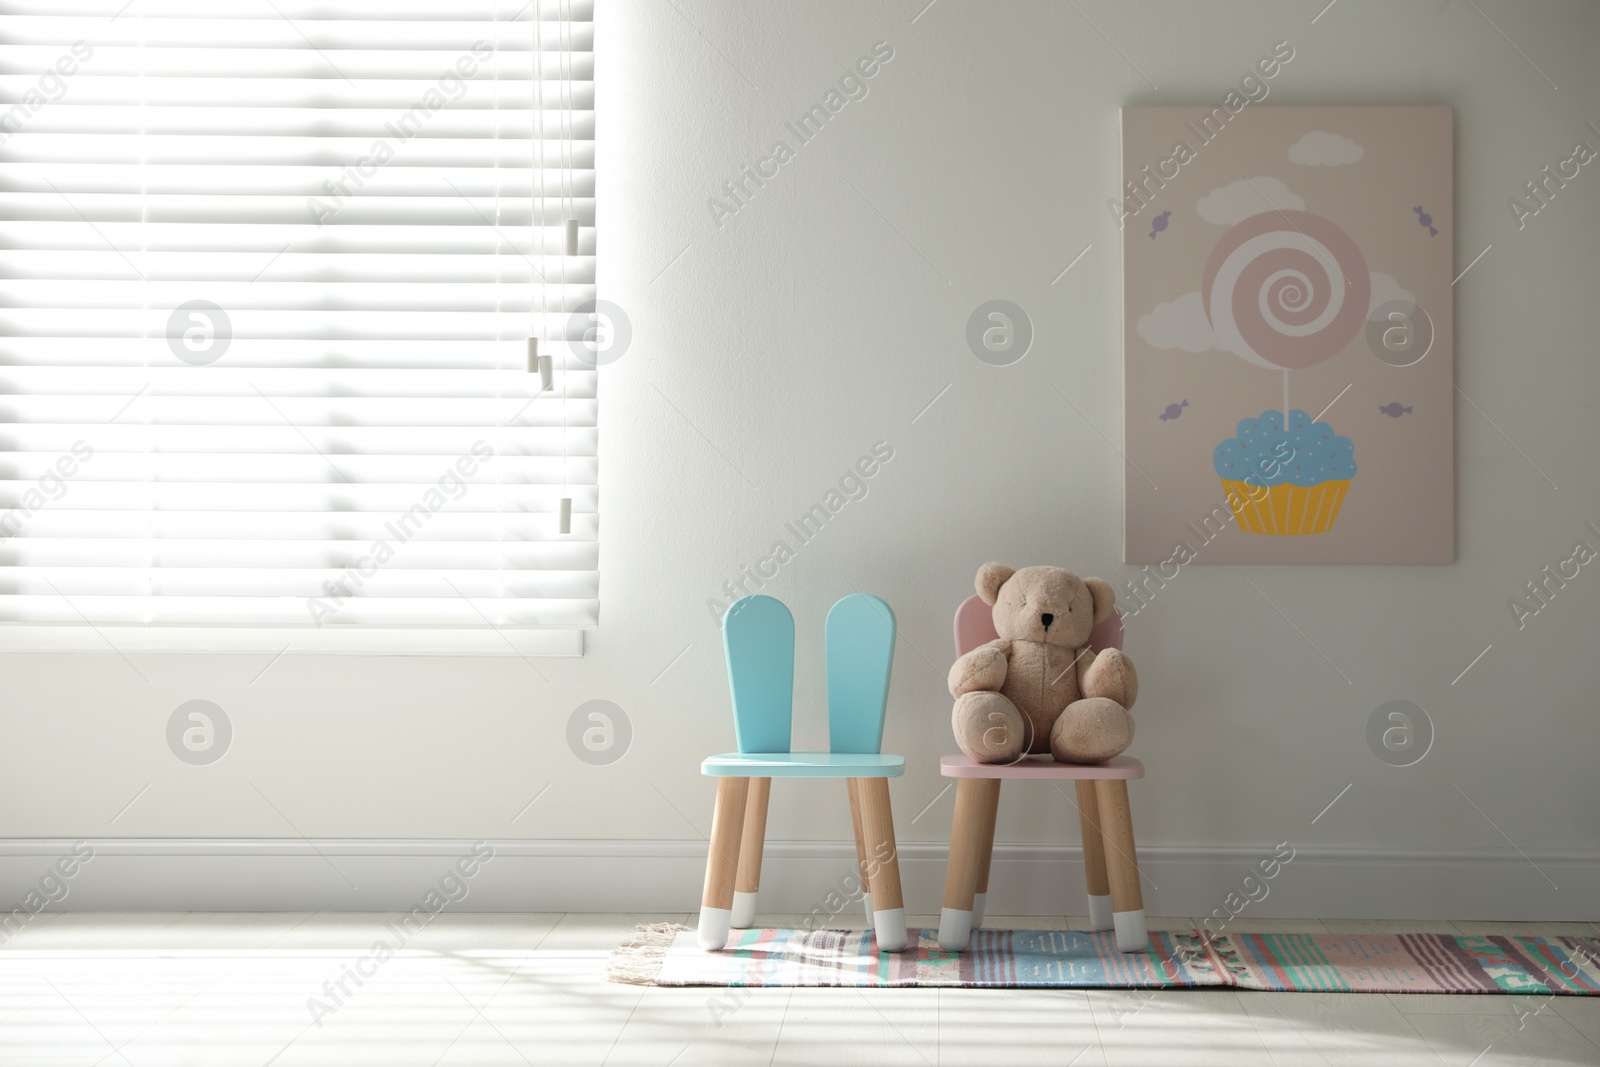 Photo of Cute chairs with bunny ears in children's room interior